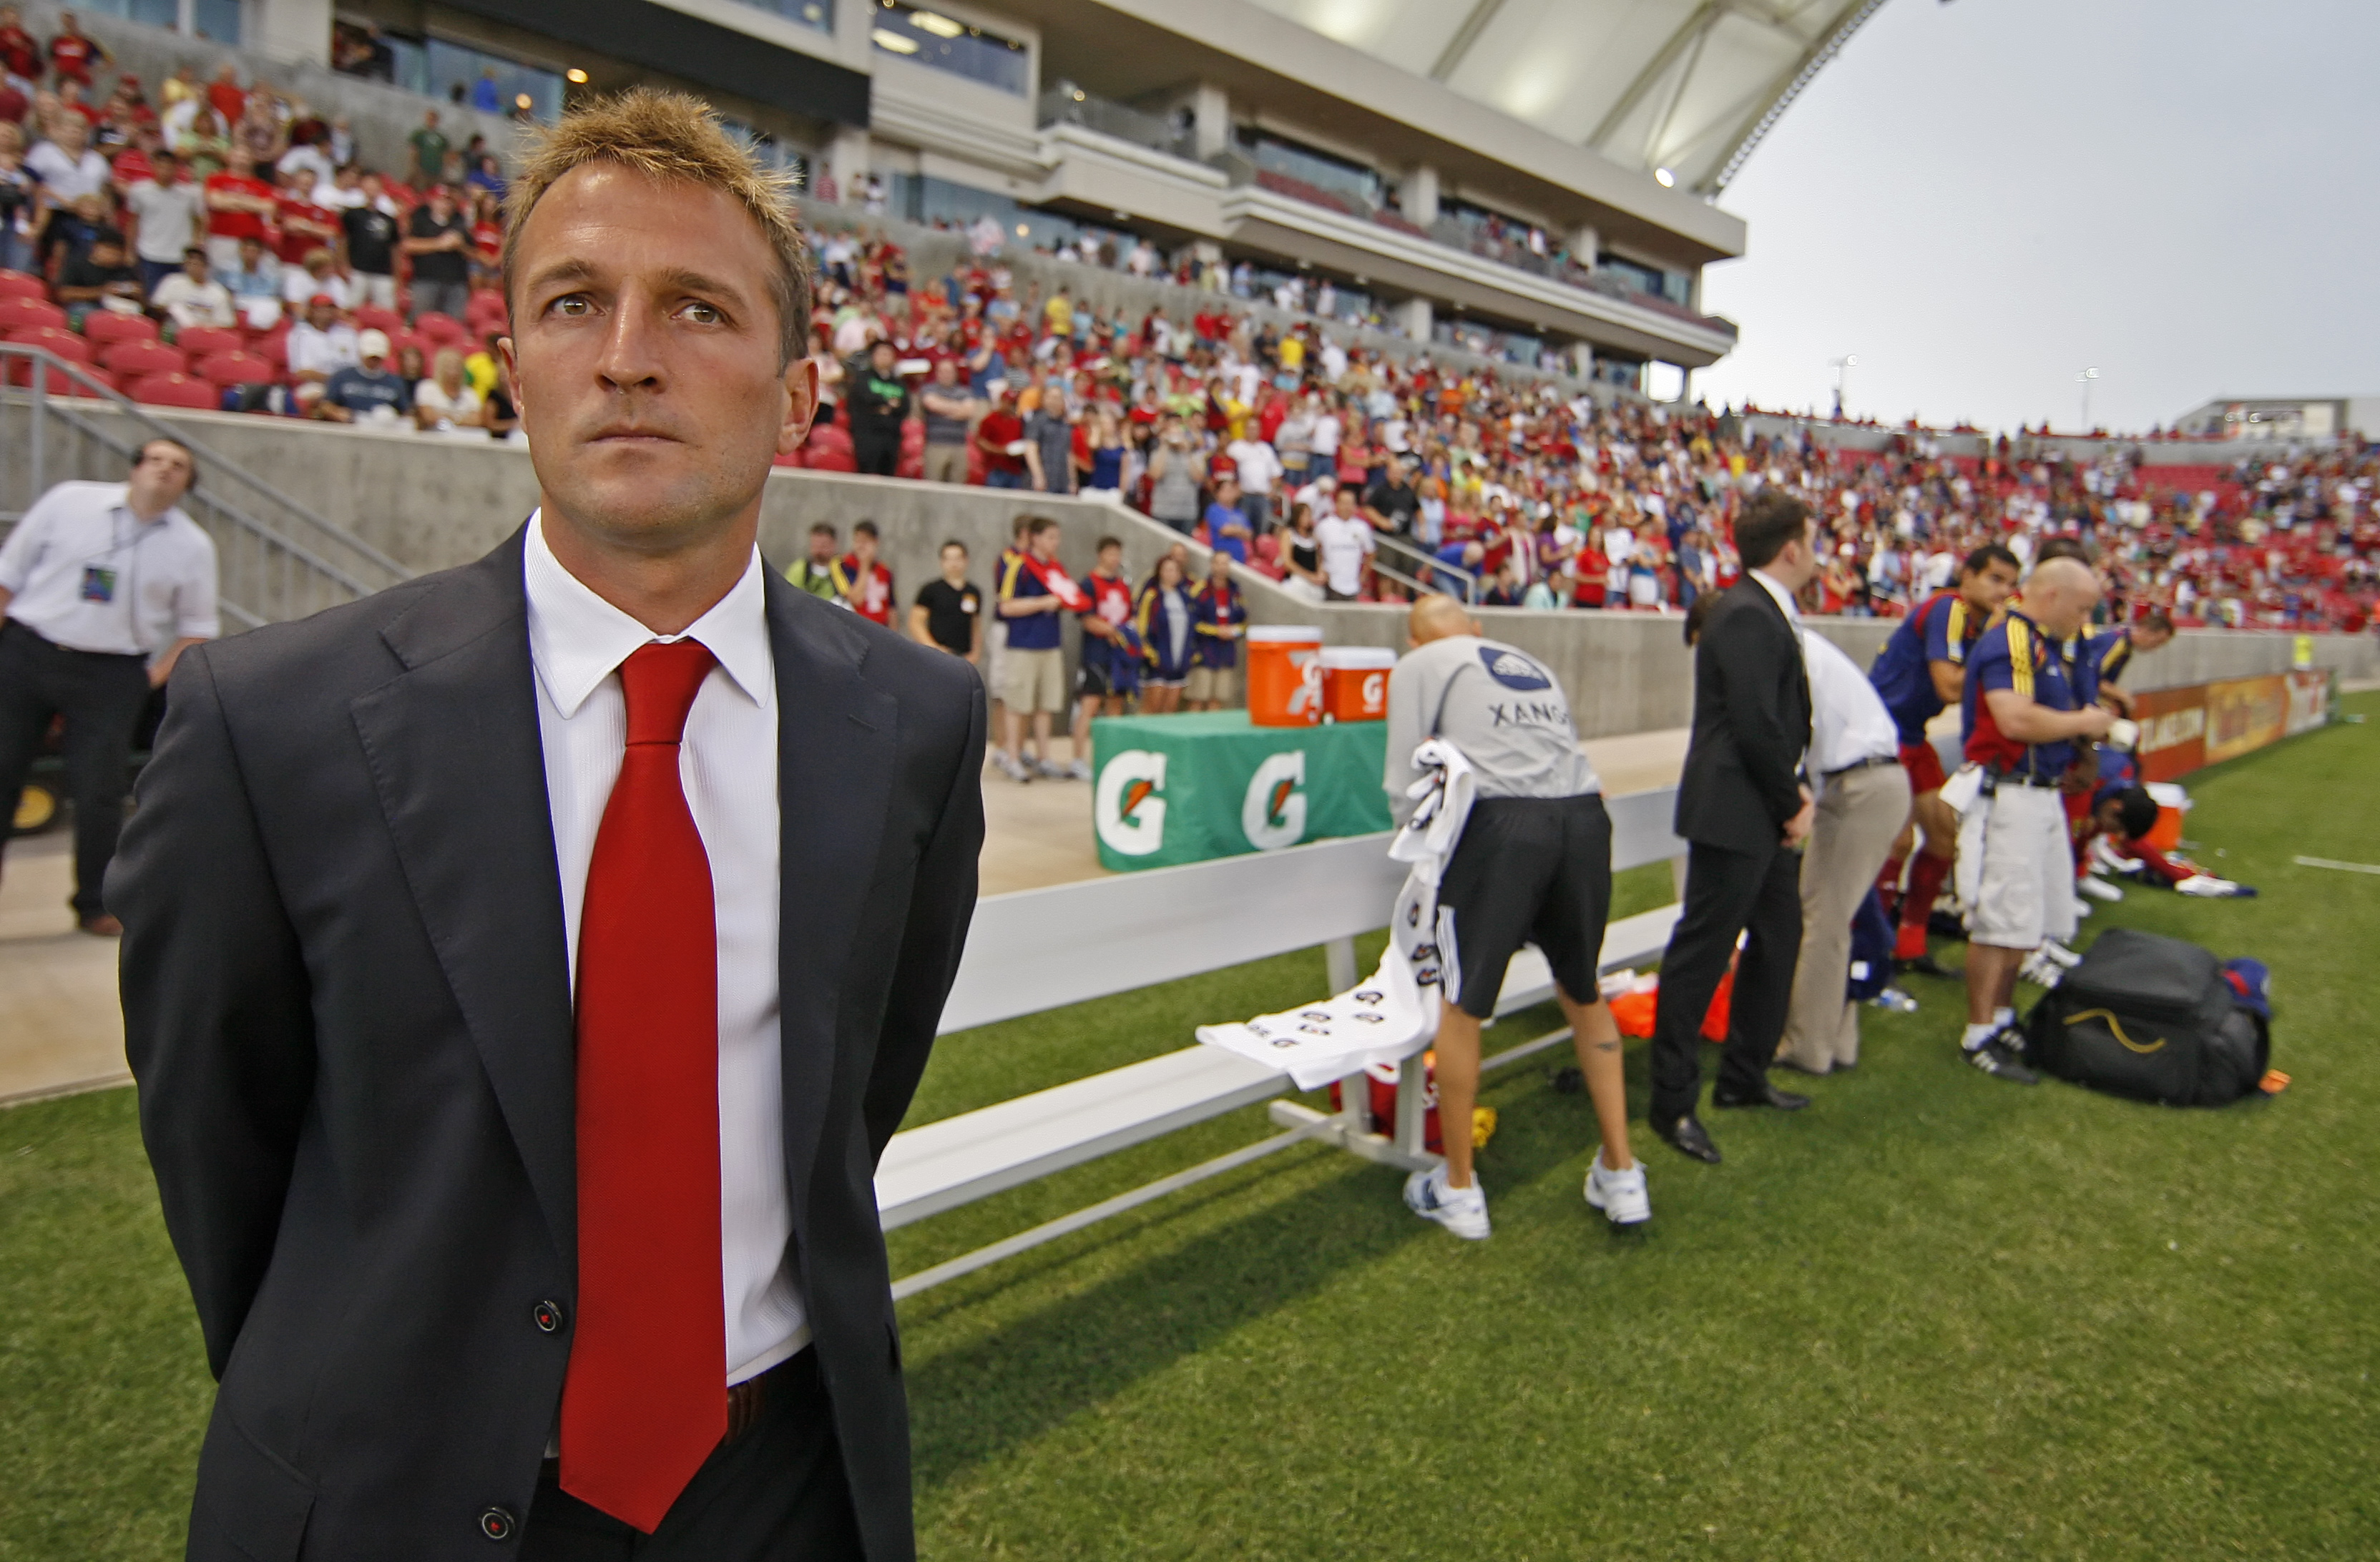 SANDY, UT - JULY 31: Head coach of Real Salt Lake Jason Kreis and players wait for a game against DC United to start at an MLS soccer game against Real Salt Lake July 31, 2010 at Rio Tinto Stadium in Sandy, Utah. (Photo by George Frey/Getty Images)